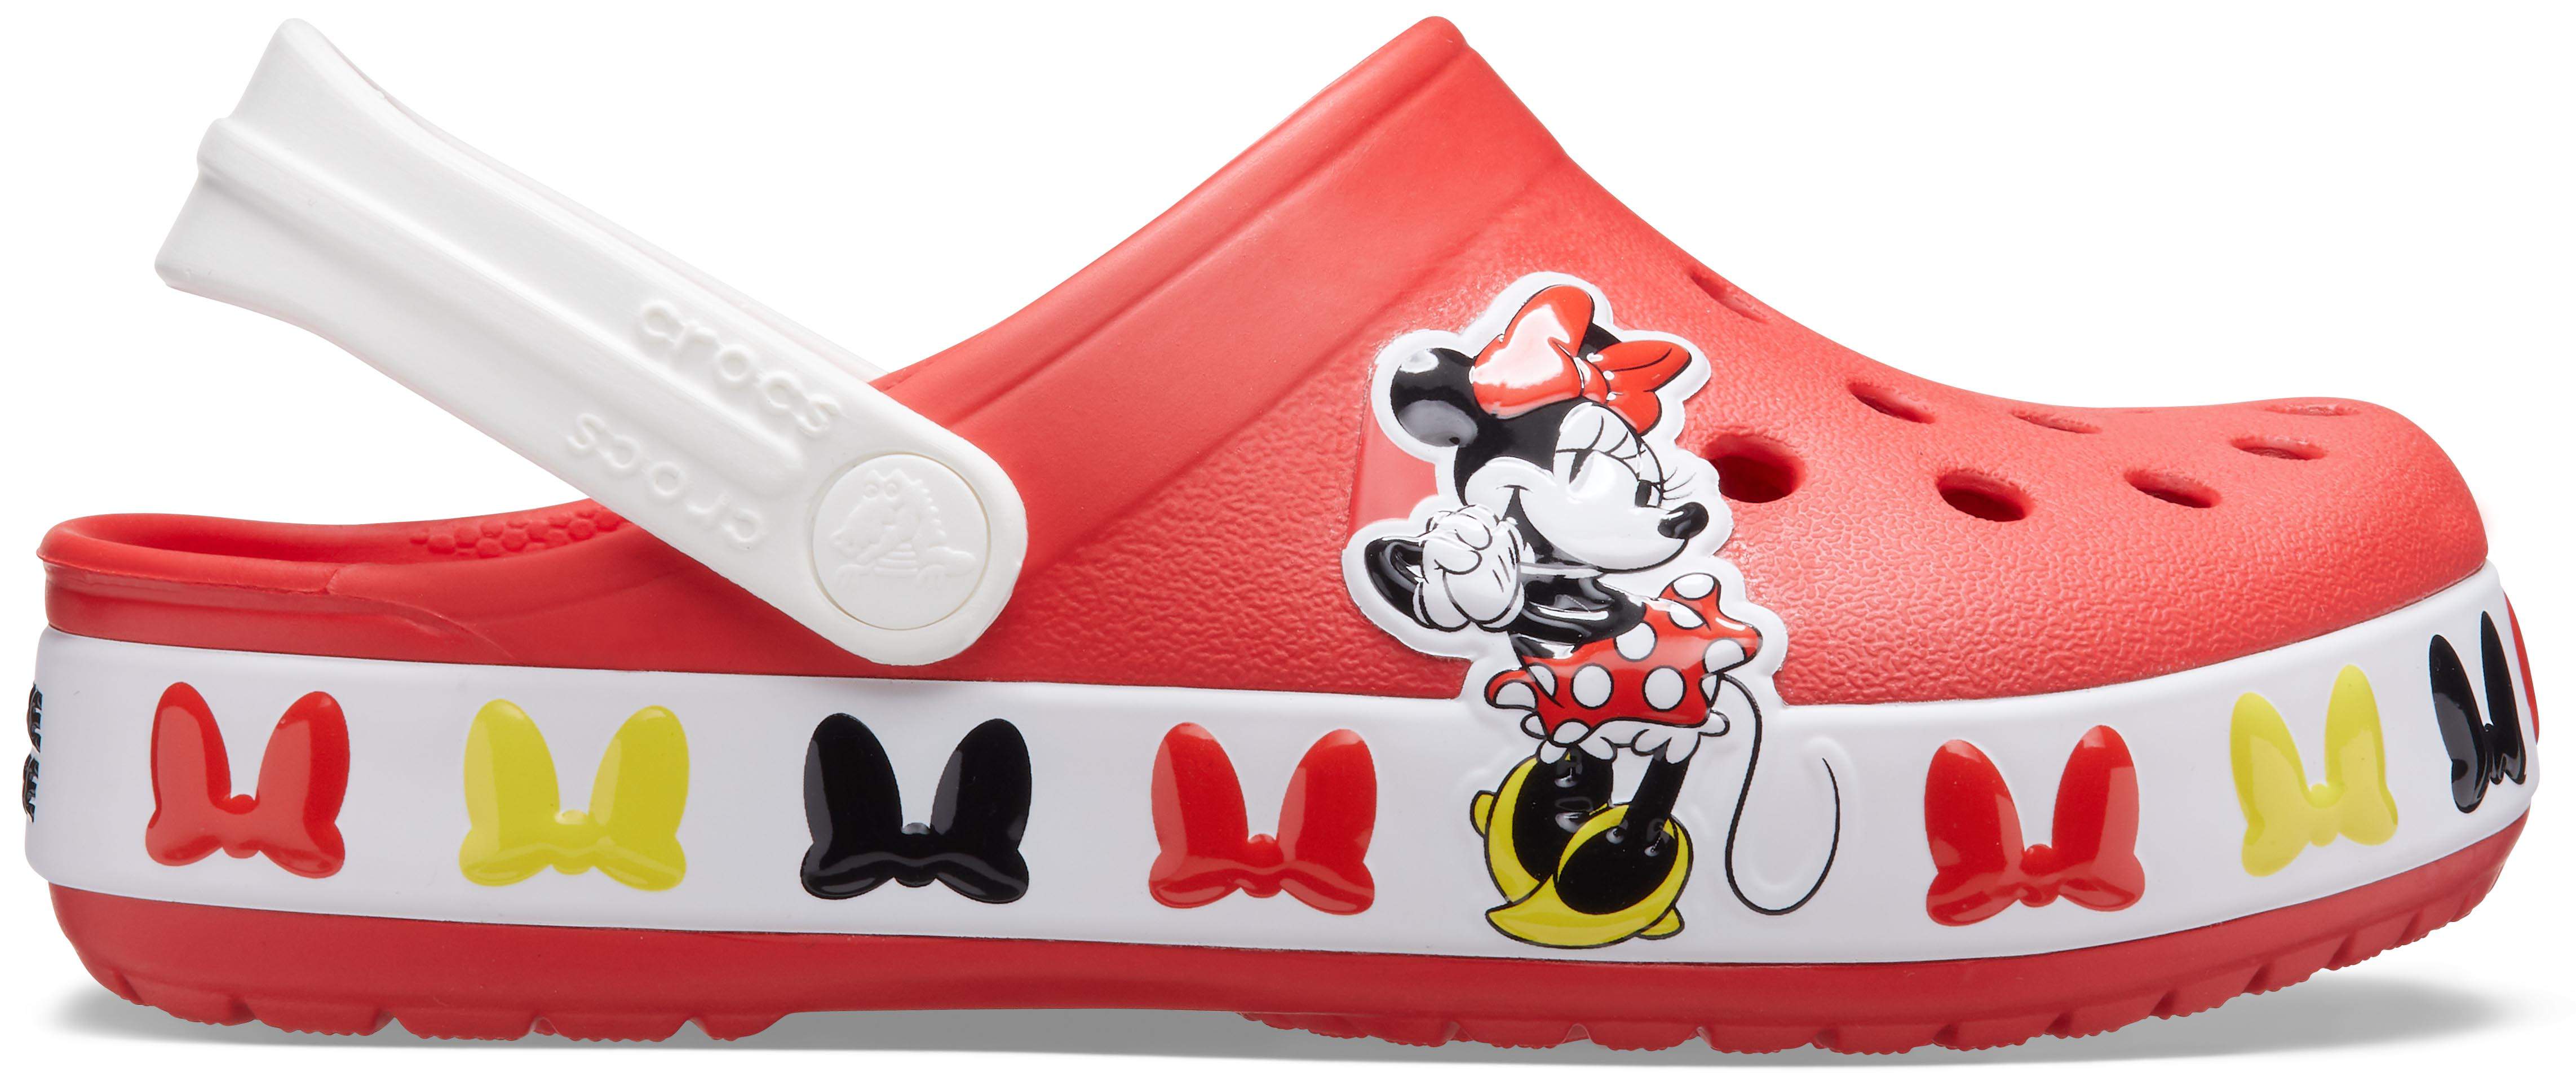 minnie mouse clogs